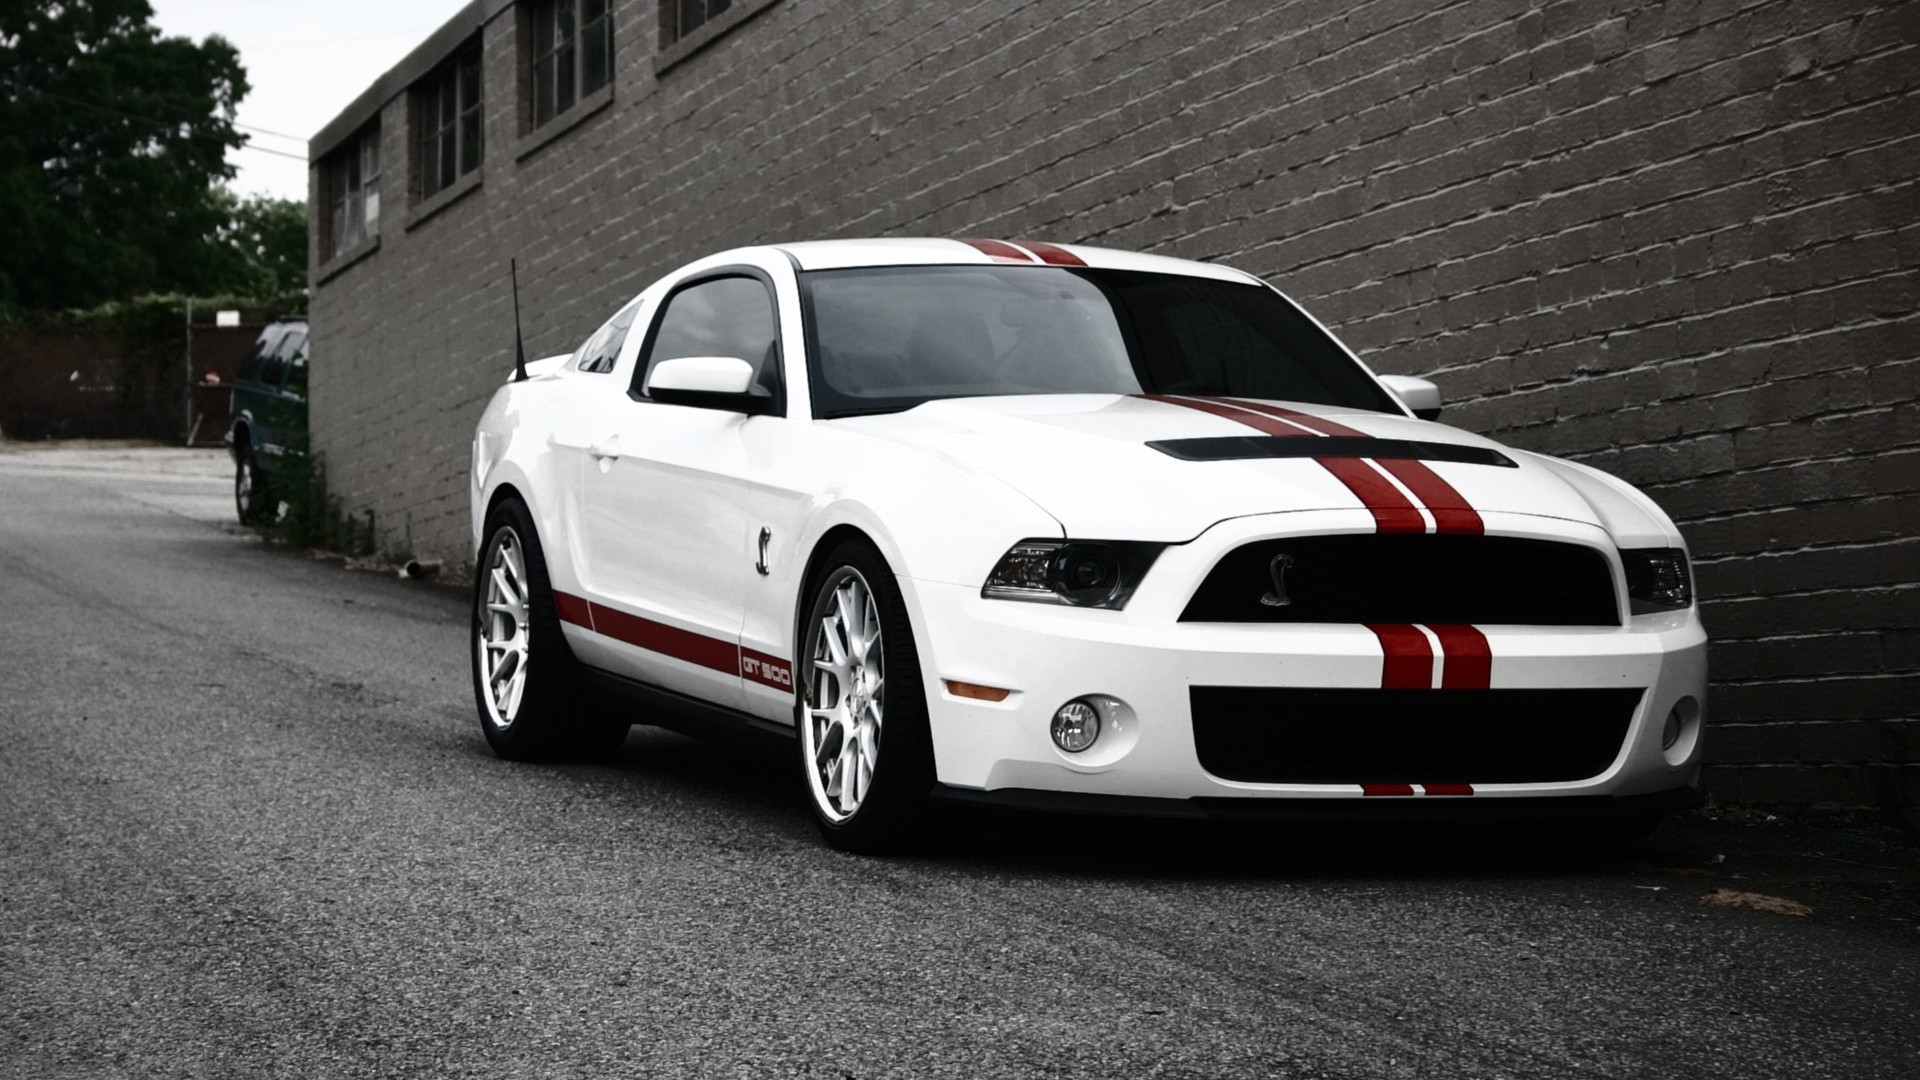 Ford Mustang Gt500 Ford White Cars Vehicle 1920x1080